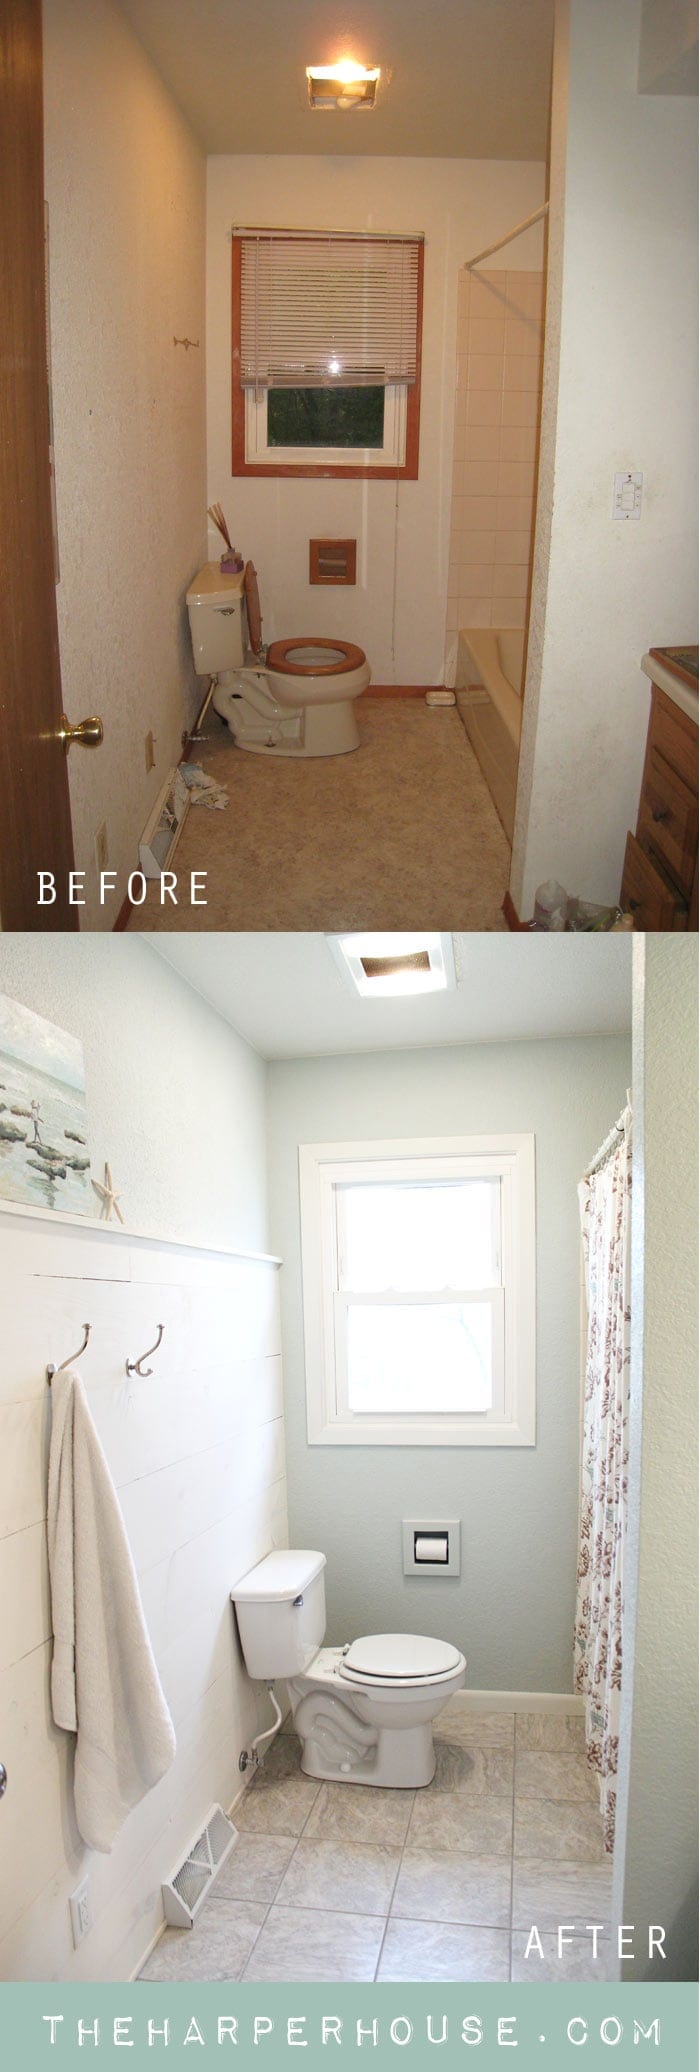 wow! amazing transformation of this ugly bath - check out before & after pics of the whole house | The Harper House